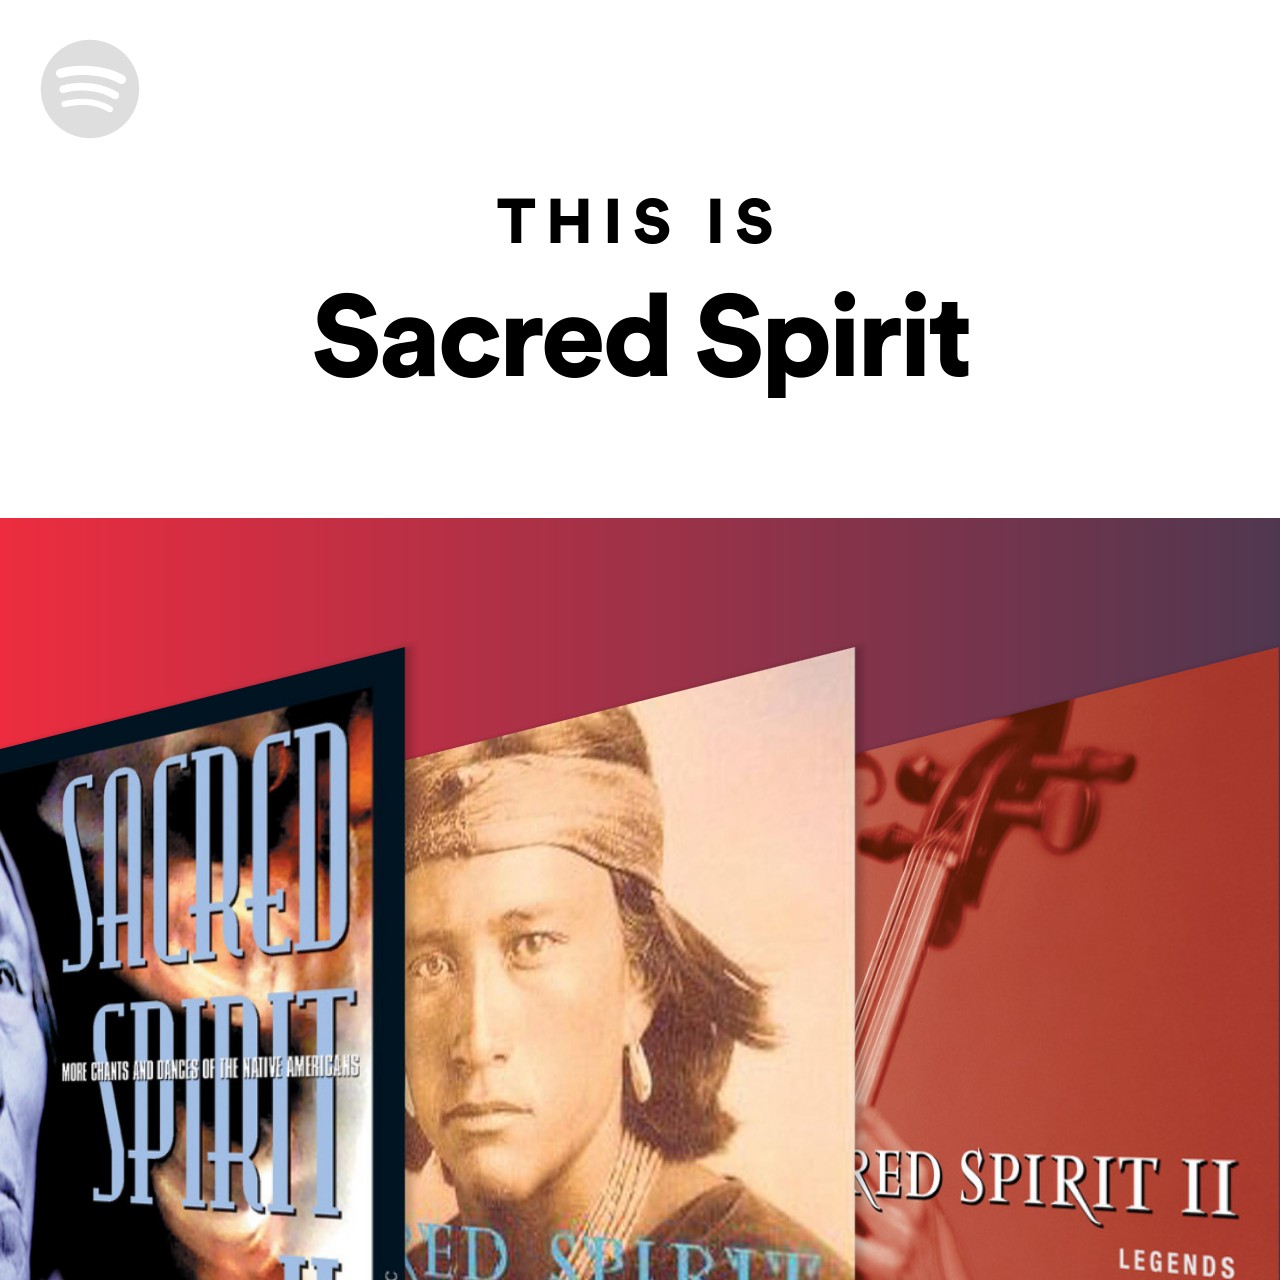 This Is Sacred Spirit